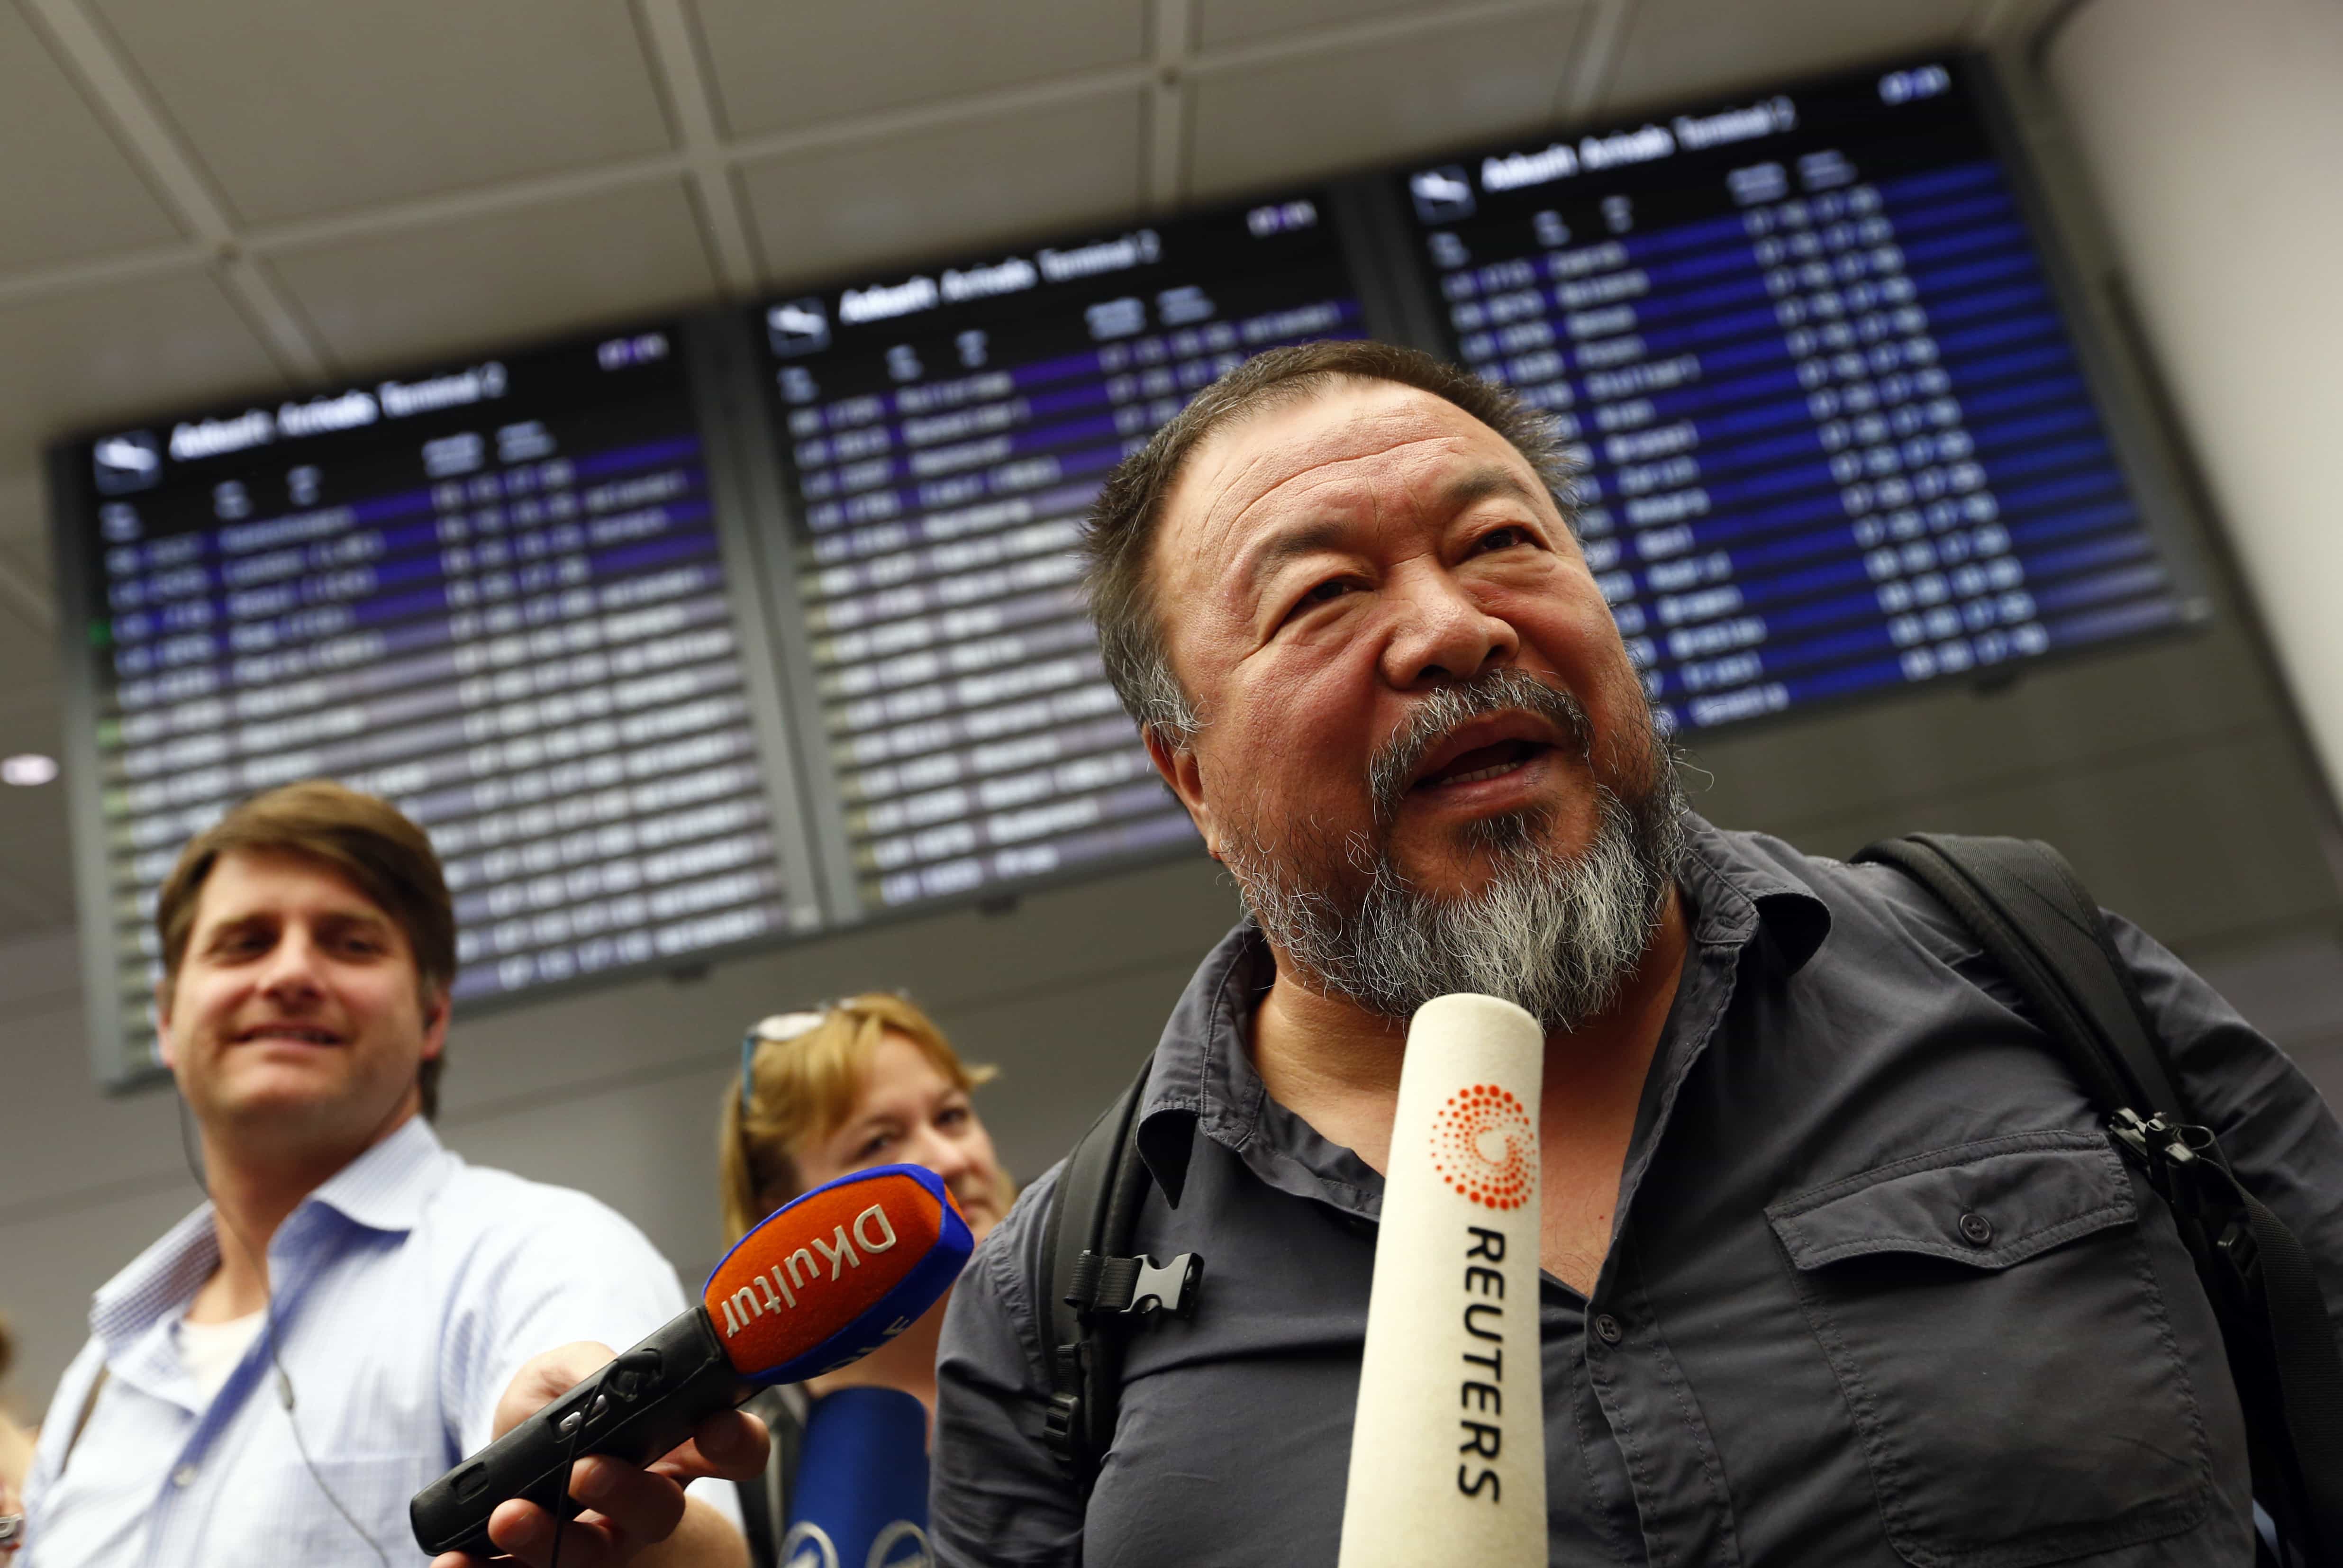 Dissident Chinese artist Ai Weiwei talks with media as he arrives at the airport in Munich, Germany, 30 July 2015, REUTERS/Michaela Rehle